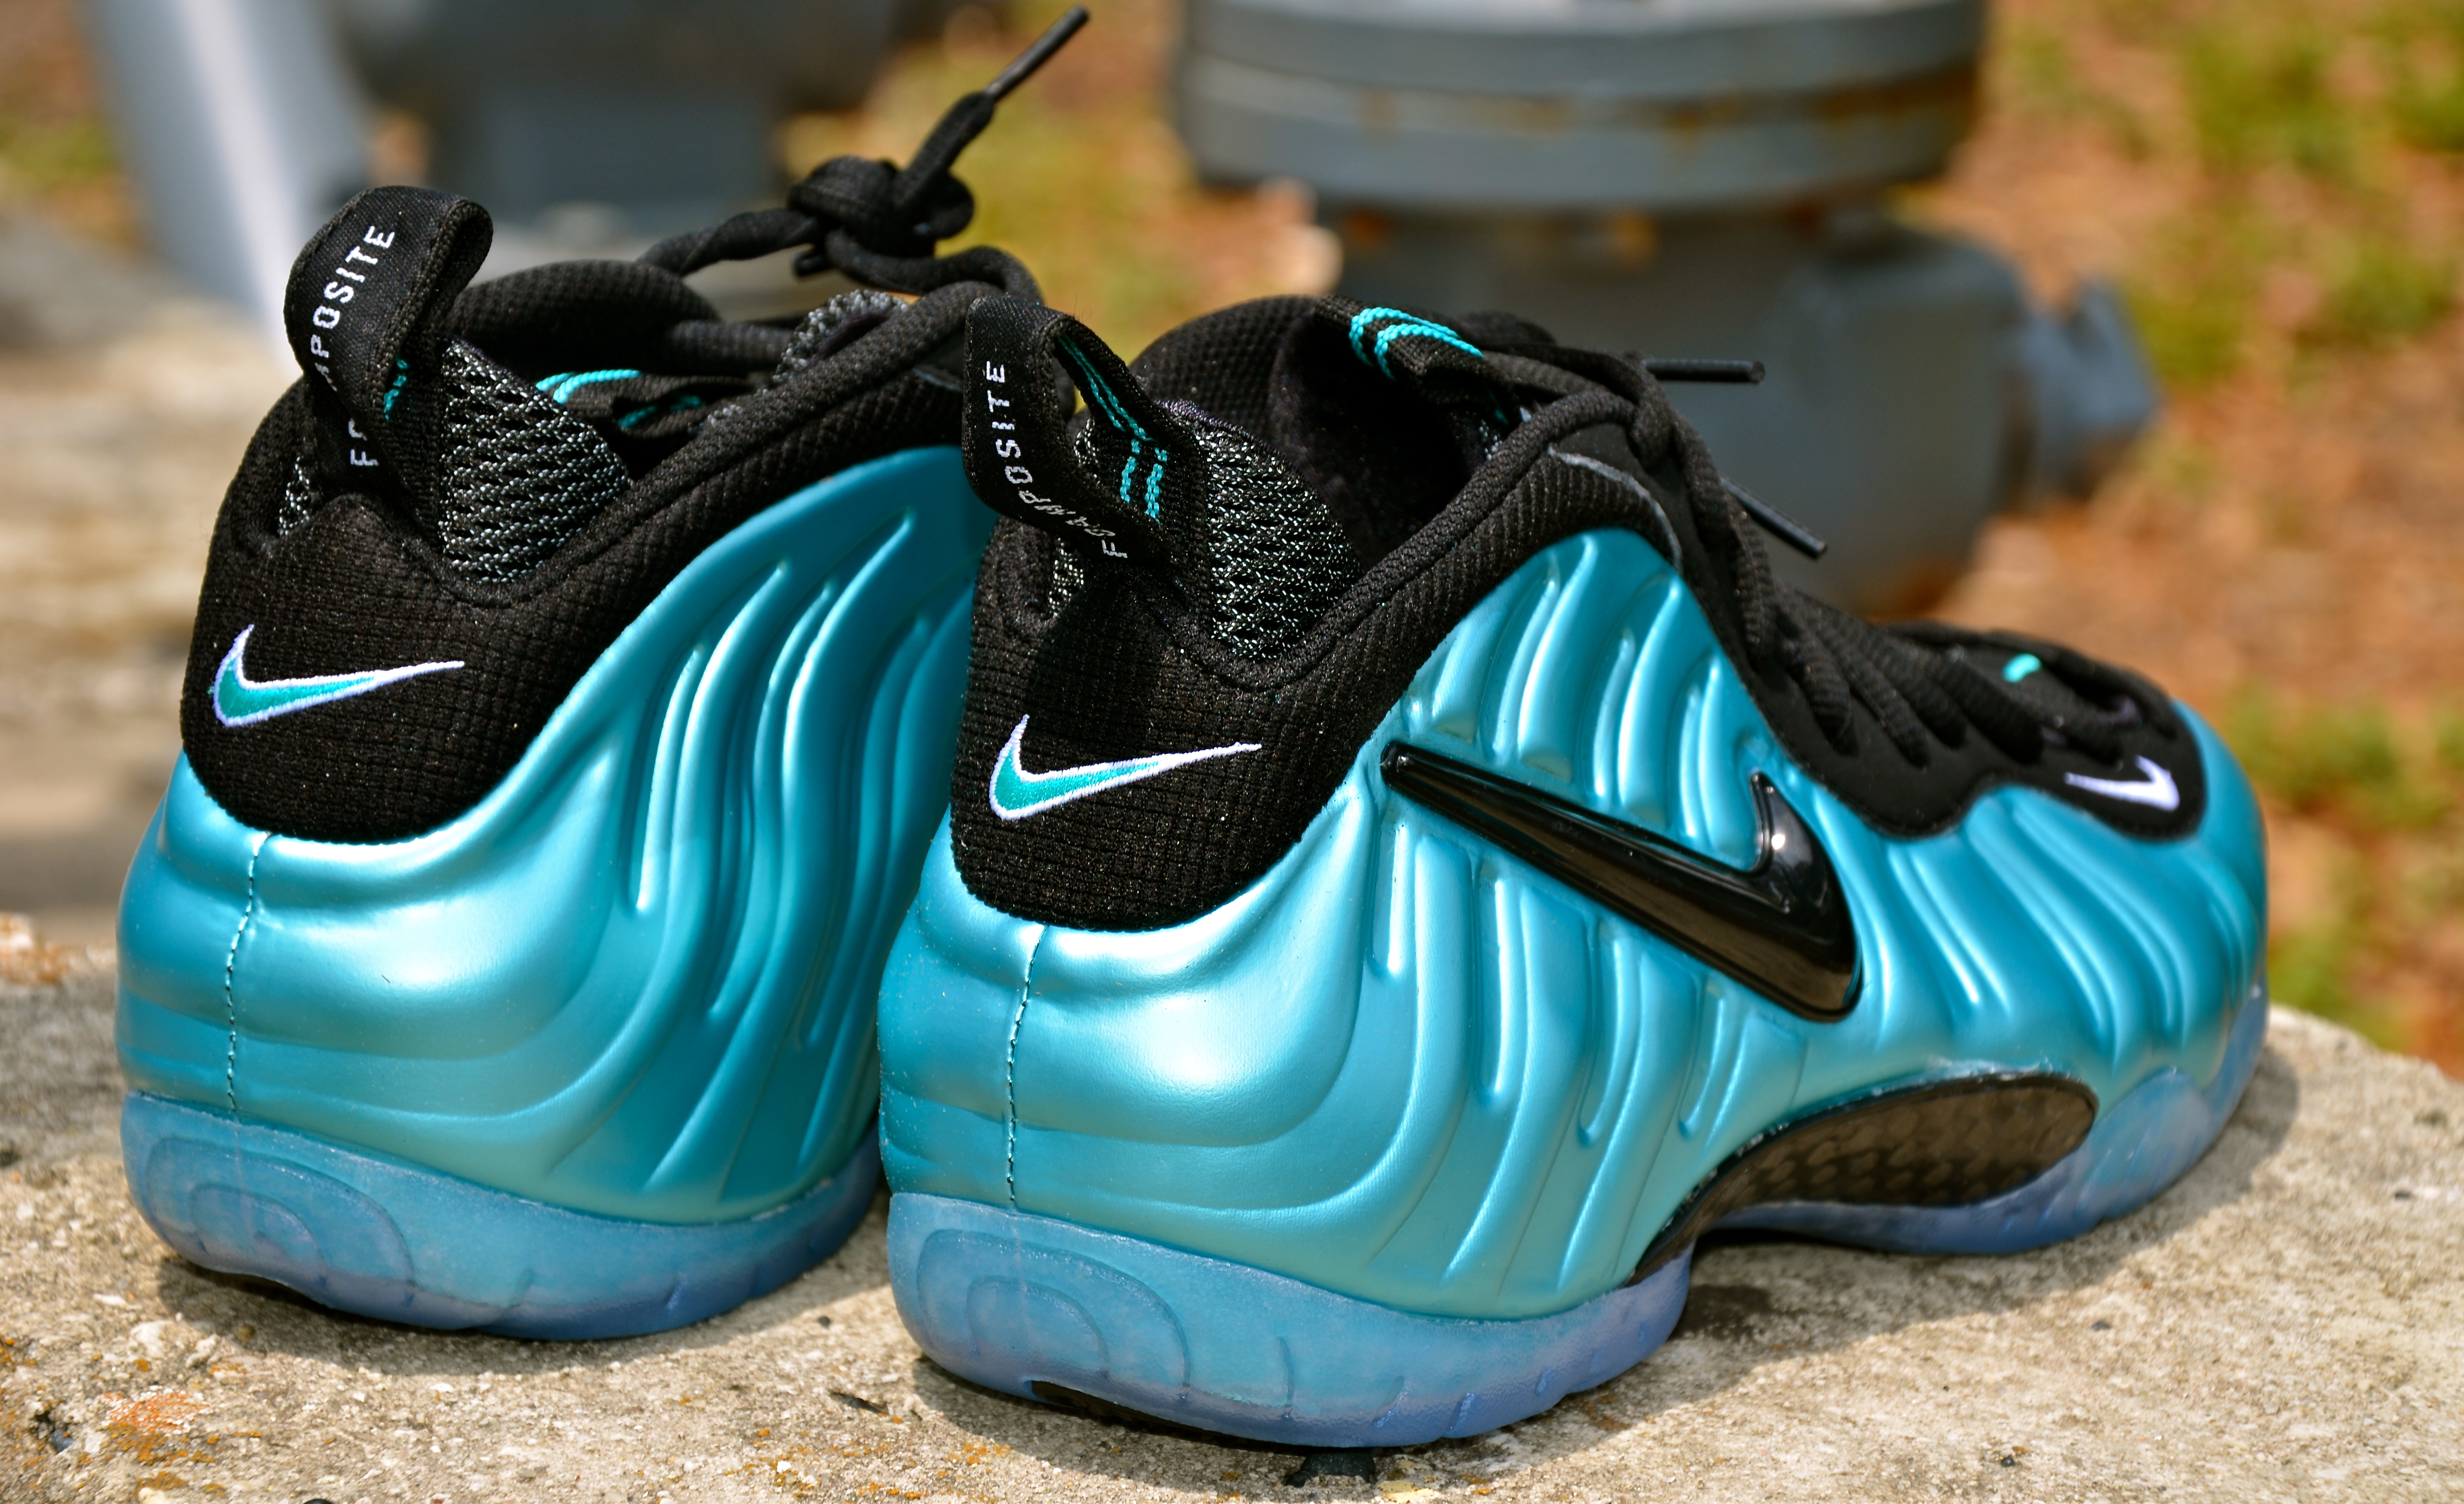 Nike Air Foamposite Pro “Turquoise 